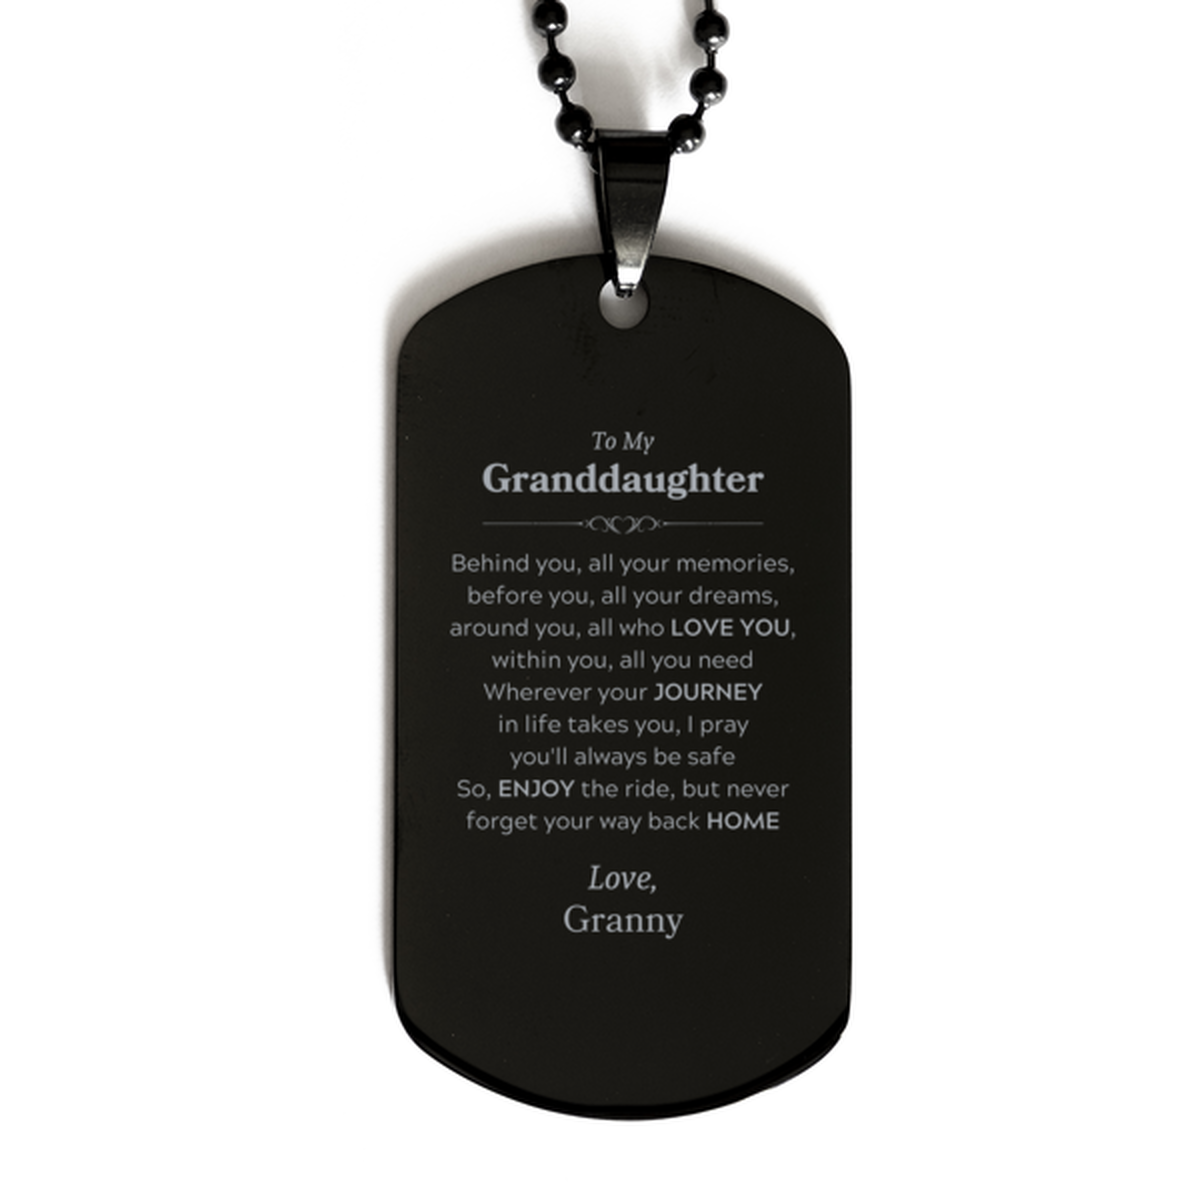 To My Granddaughter Graduation Gifts from Granny, Granddaughter Black Dog Tag Christmas Birthday Gifts for Granddaughter Behind you, all your memories, before you, all your dreams. Love, Granny